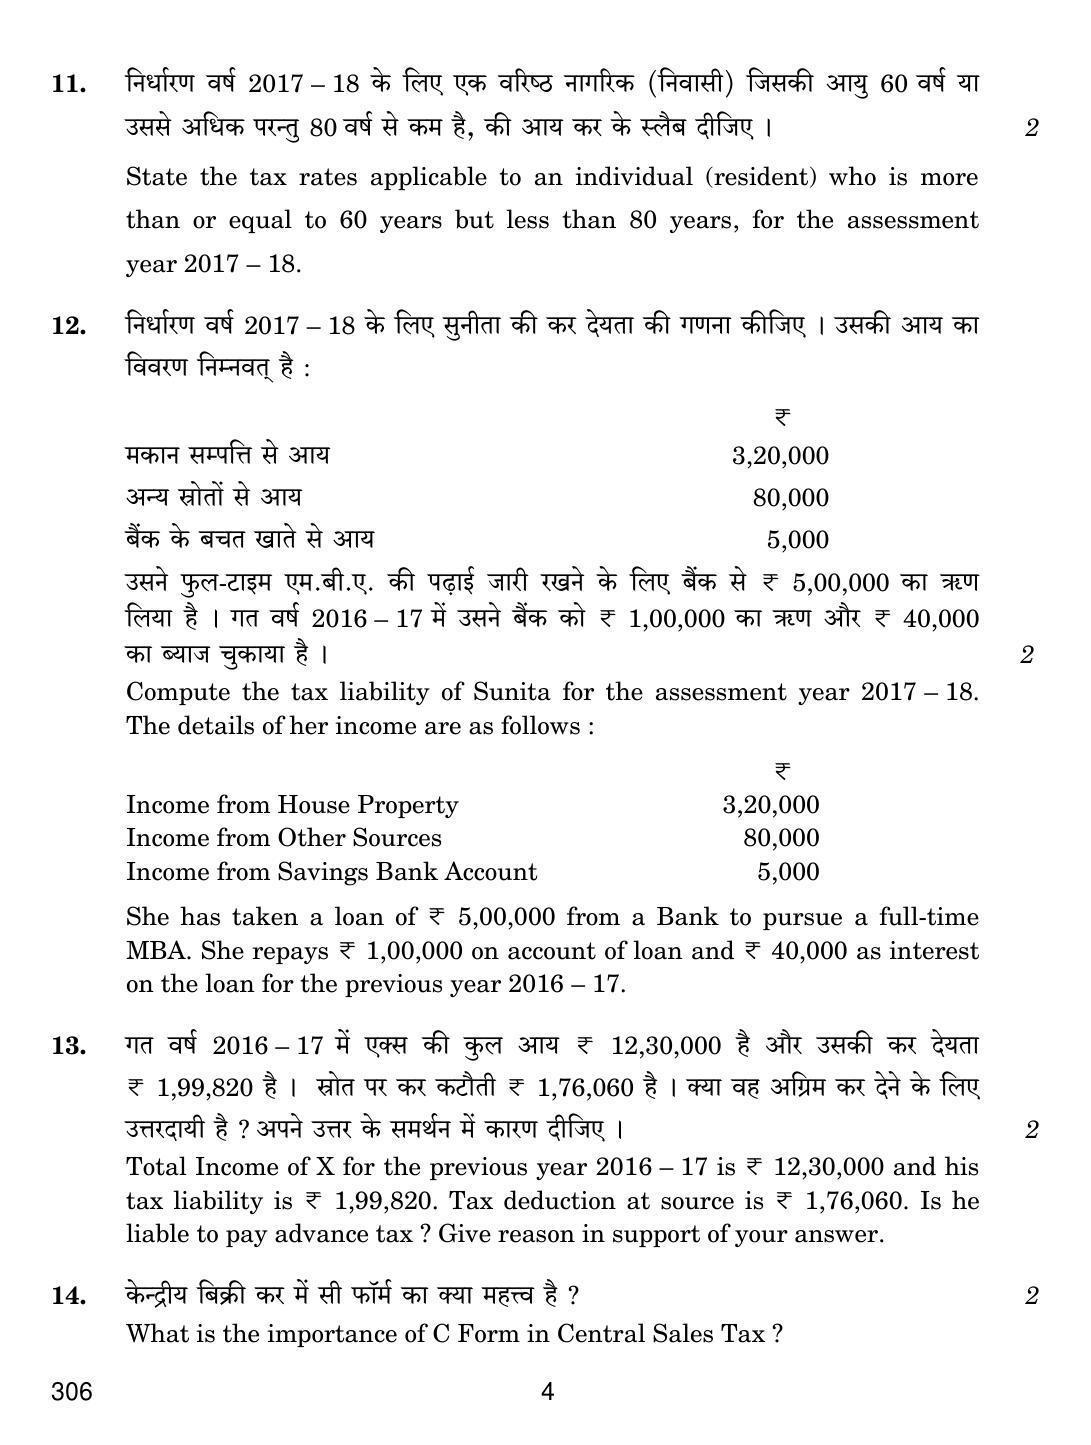 CBSE Class 12 306 TAXATION 2018 Question Paper - Page 4